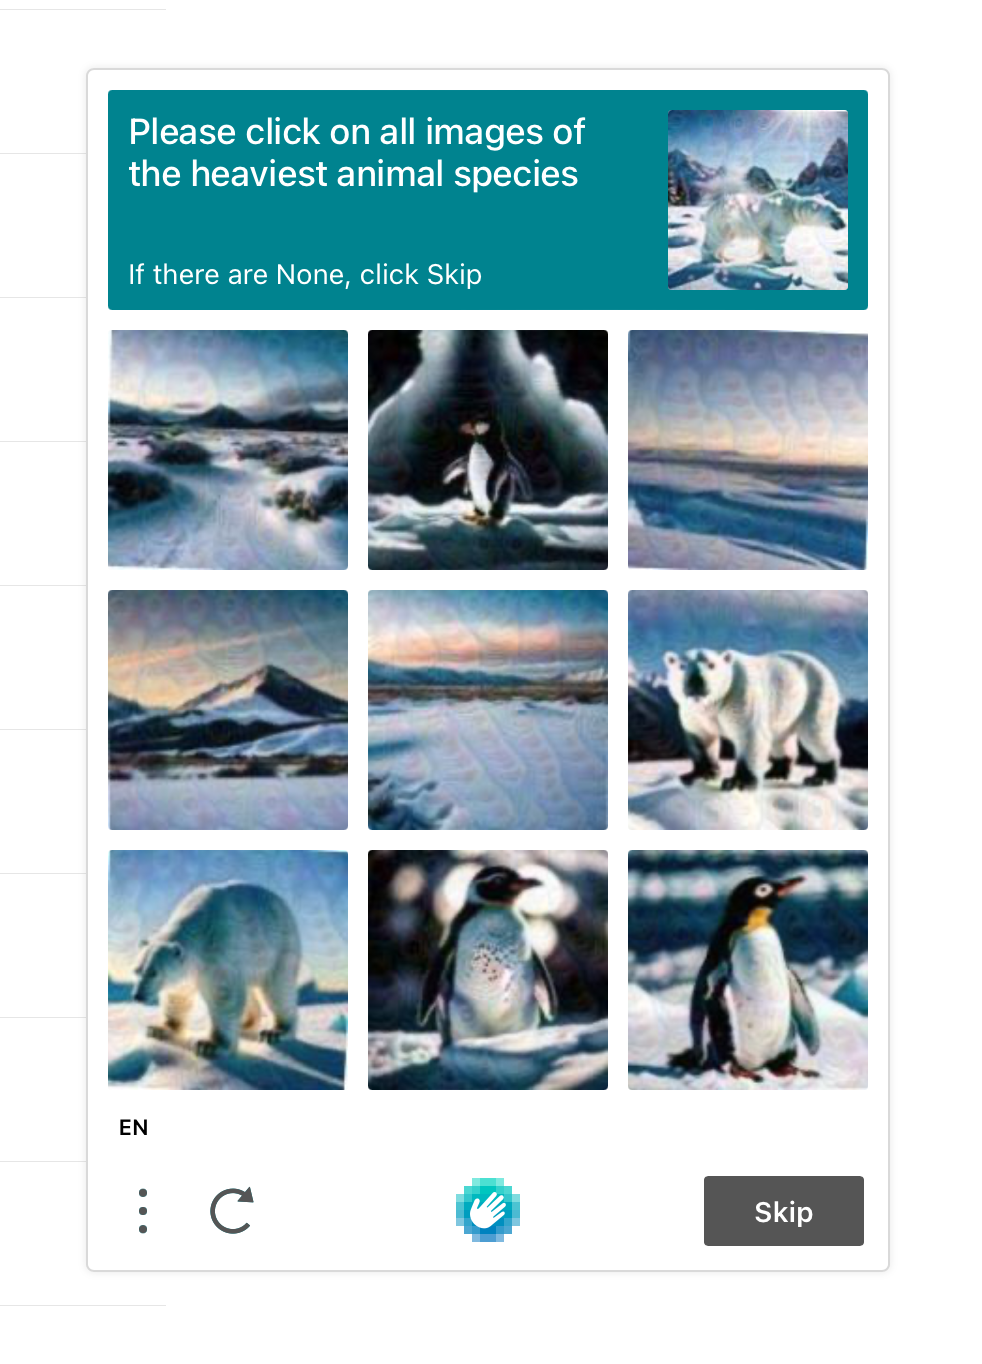 hCaptcha entitled "Please click on all images of the heaviest animal species" with pictures of GenAI penguins and polar bears